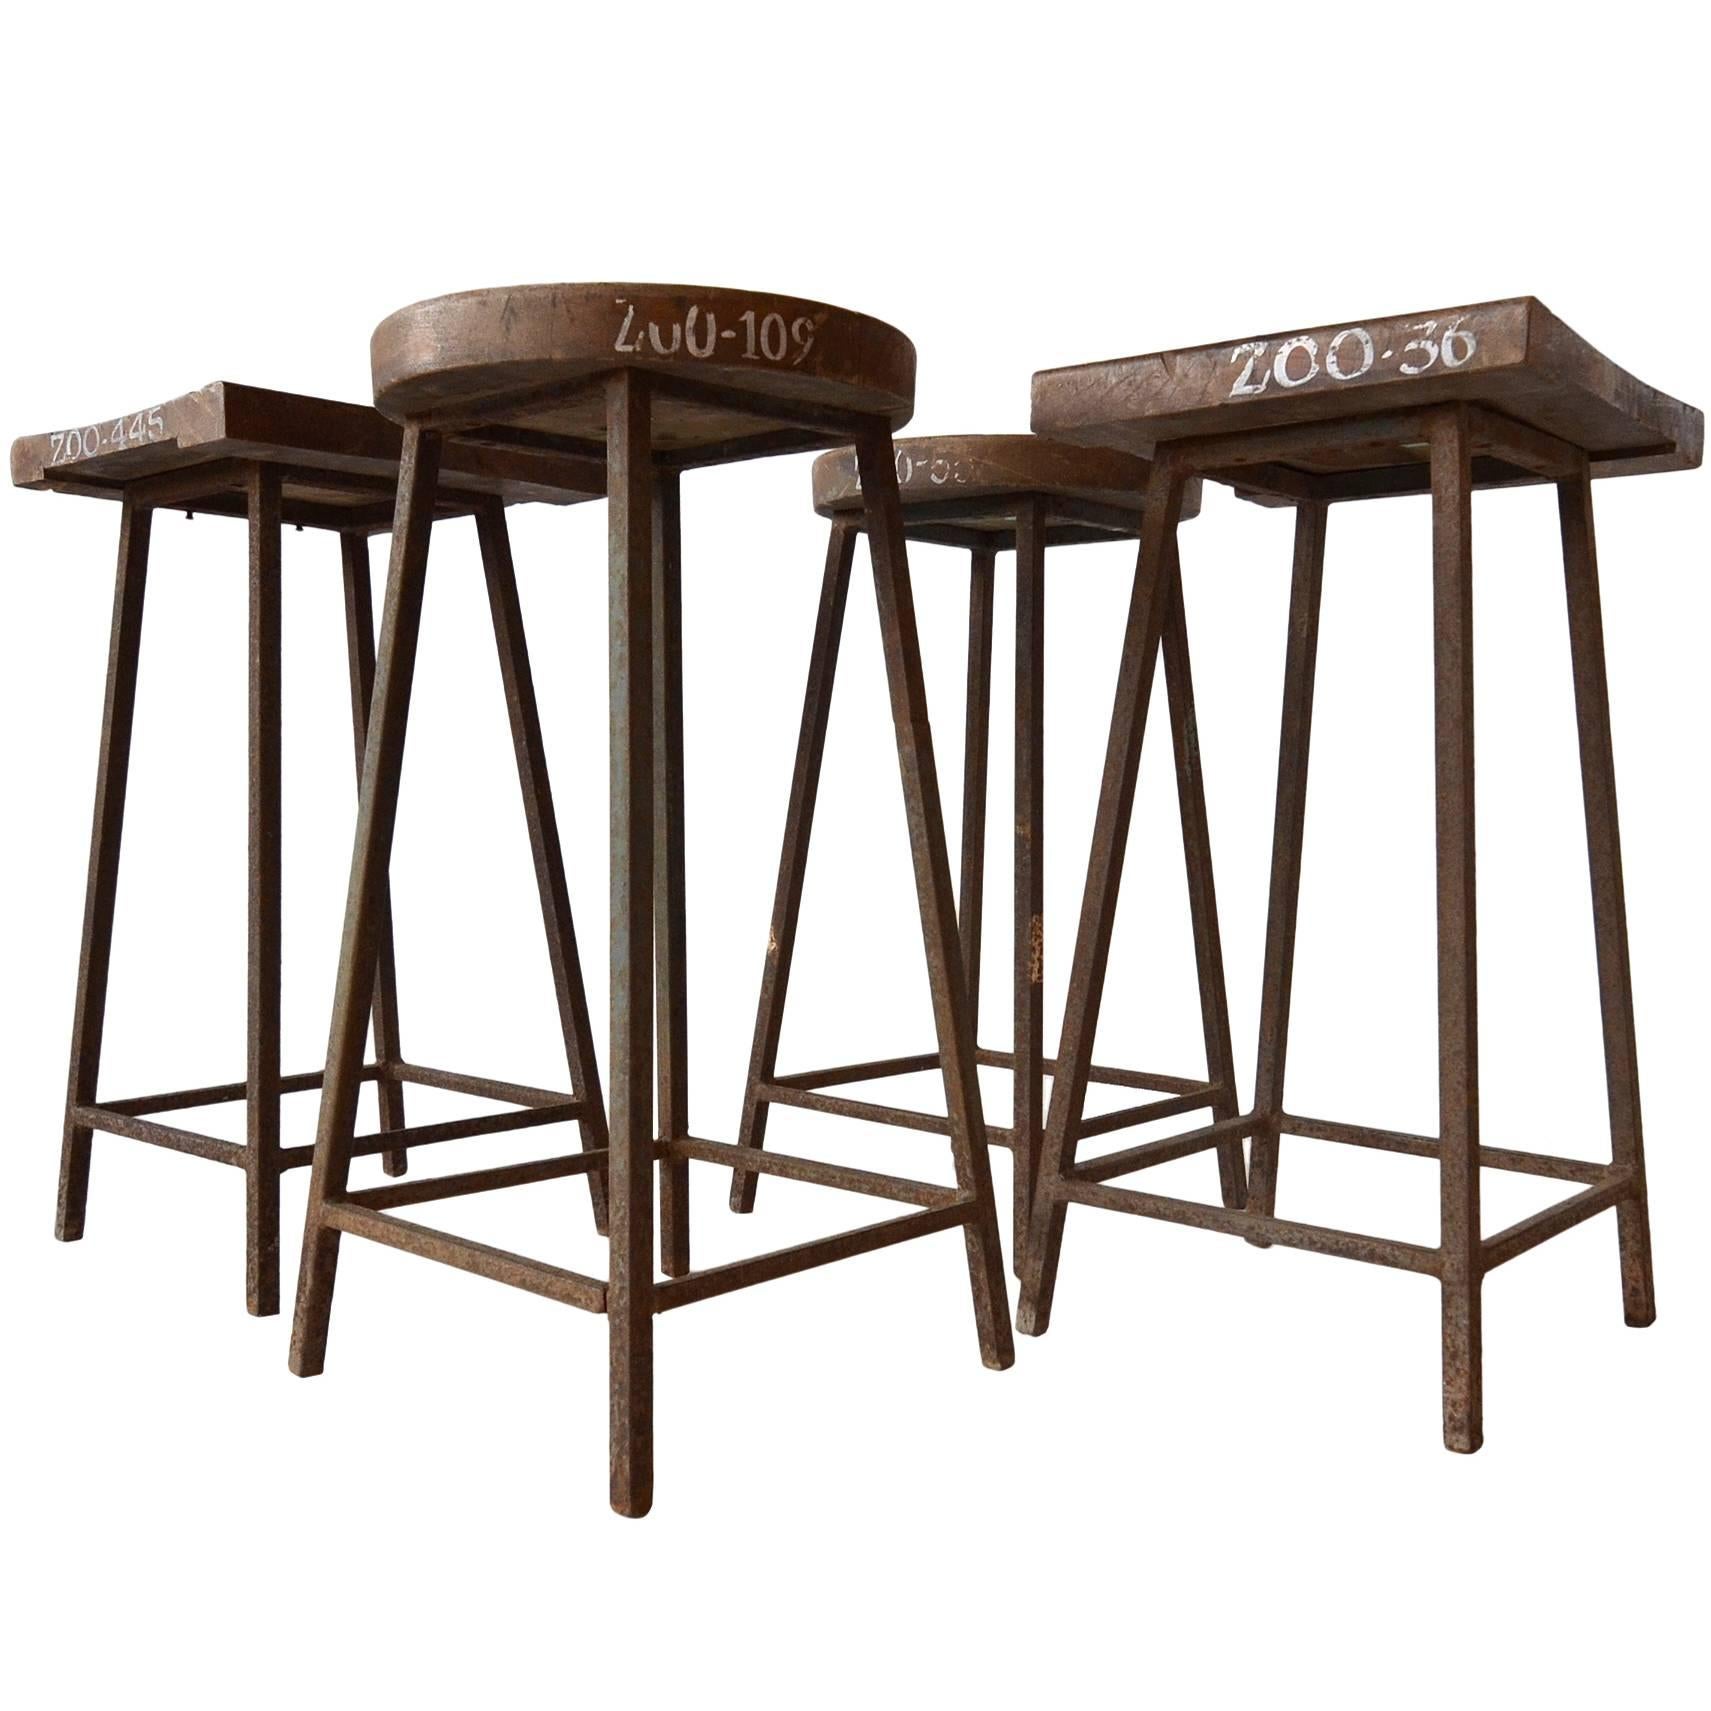 Rare Pierre Jeanneret Solid Stools for the Zoological Department